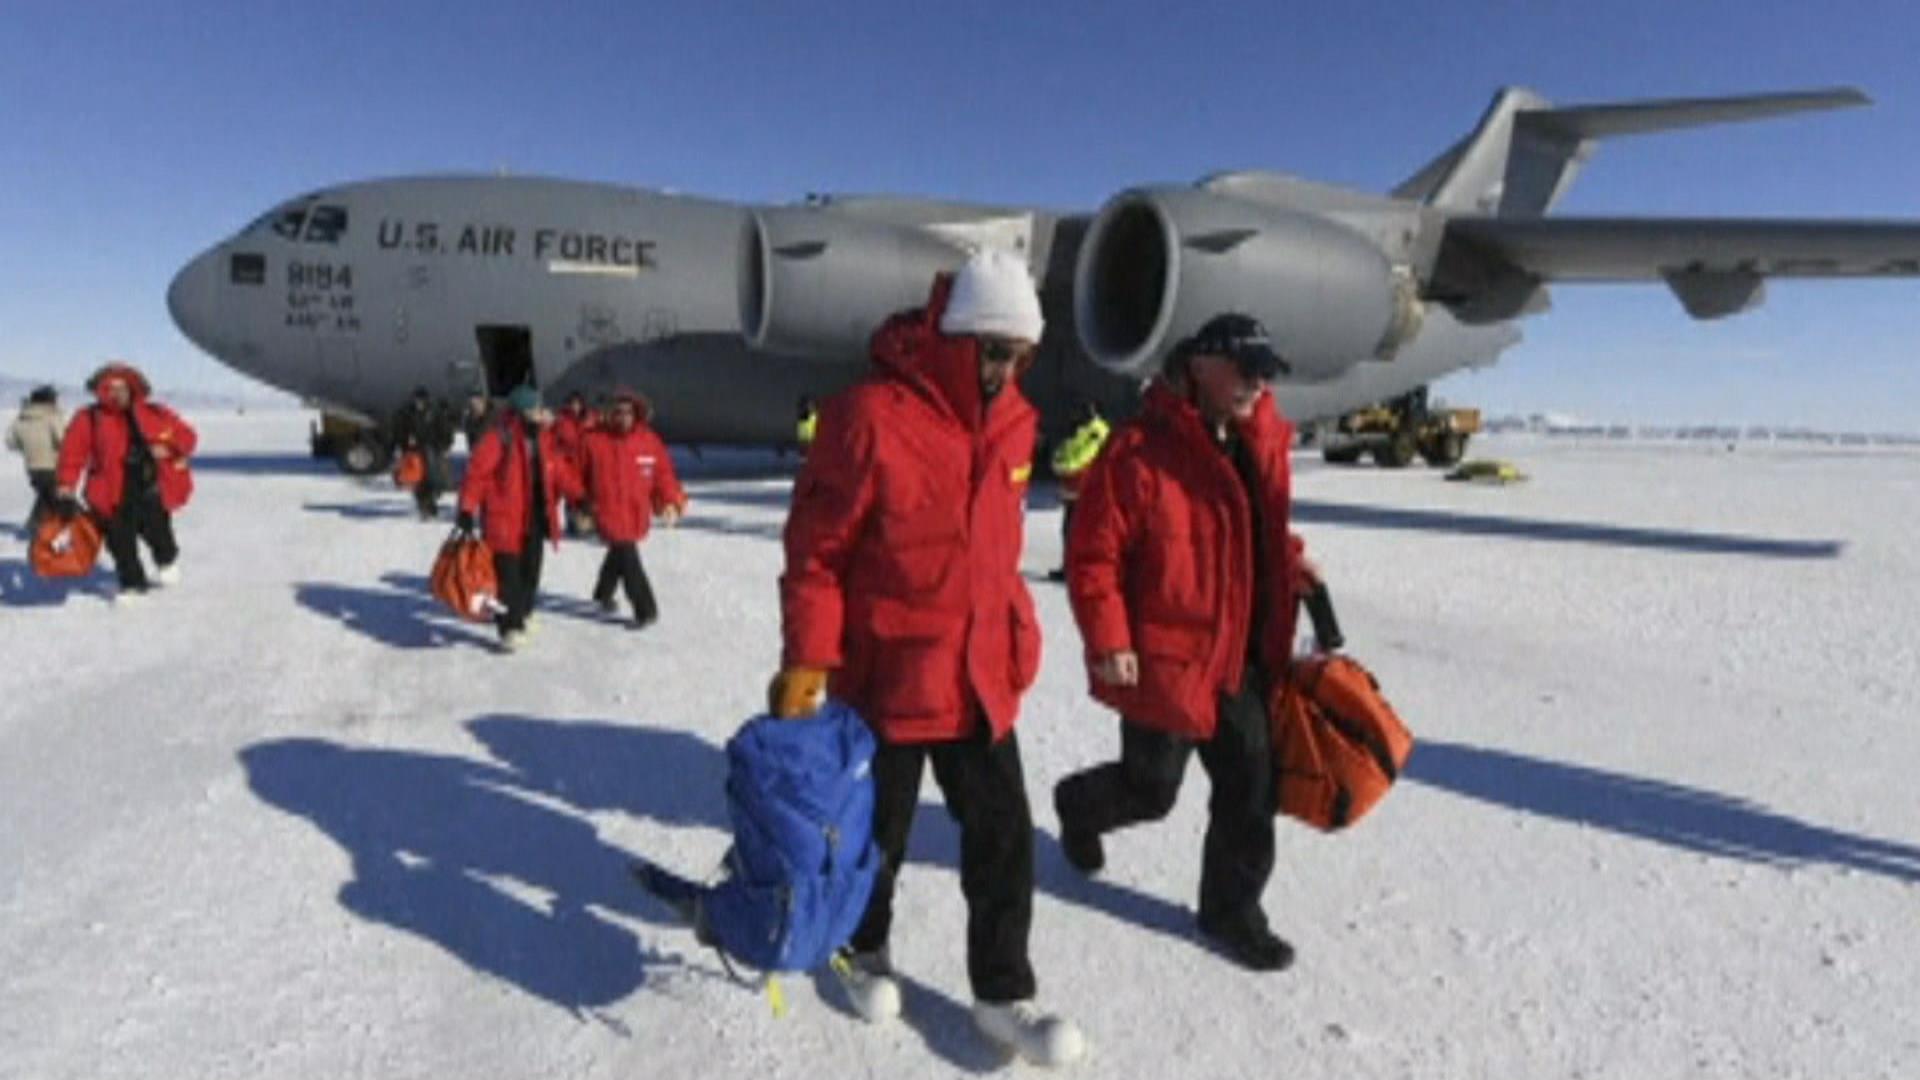 John Kerry goes to Antarctica to discuss climate change with scientists